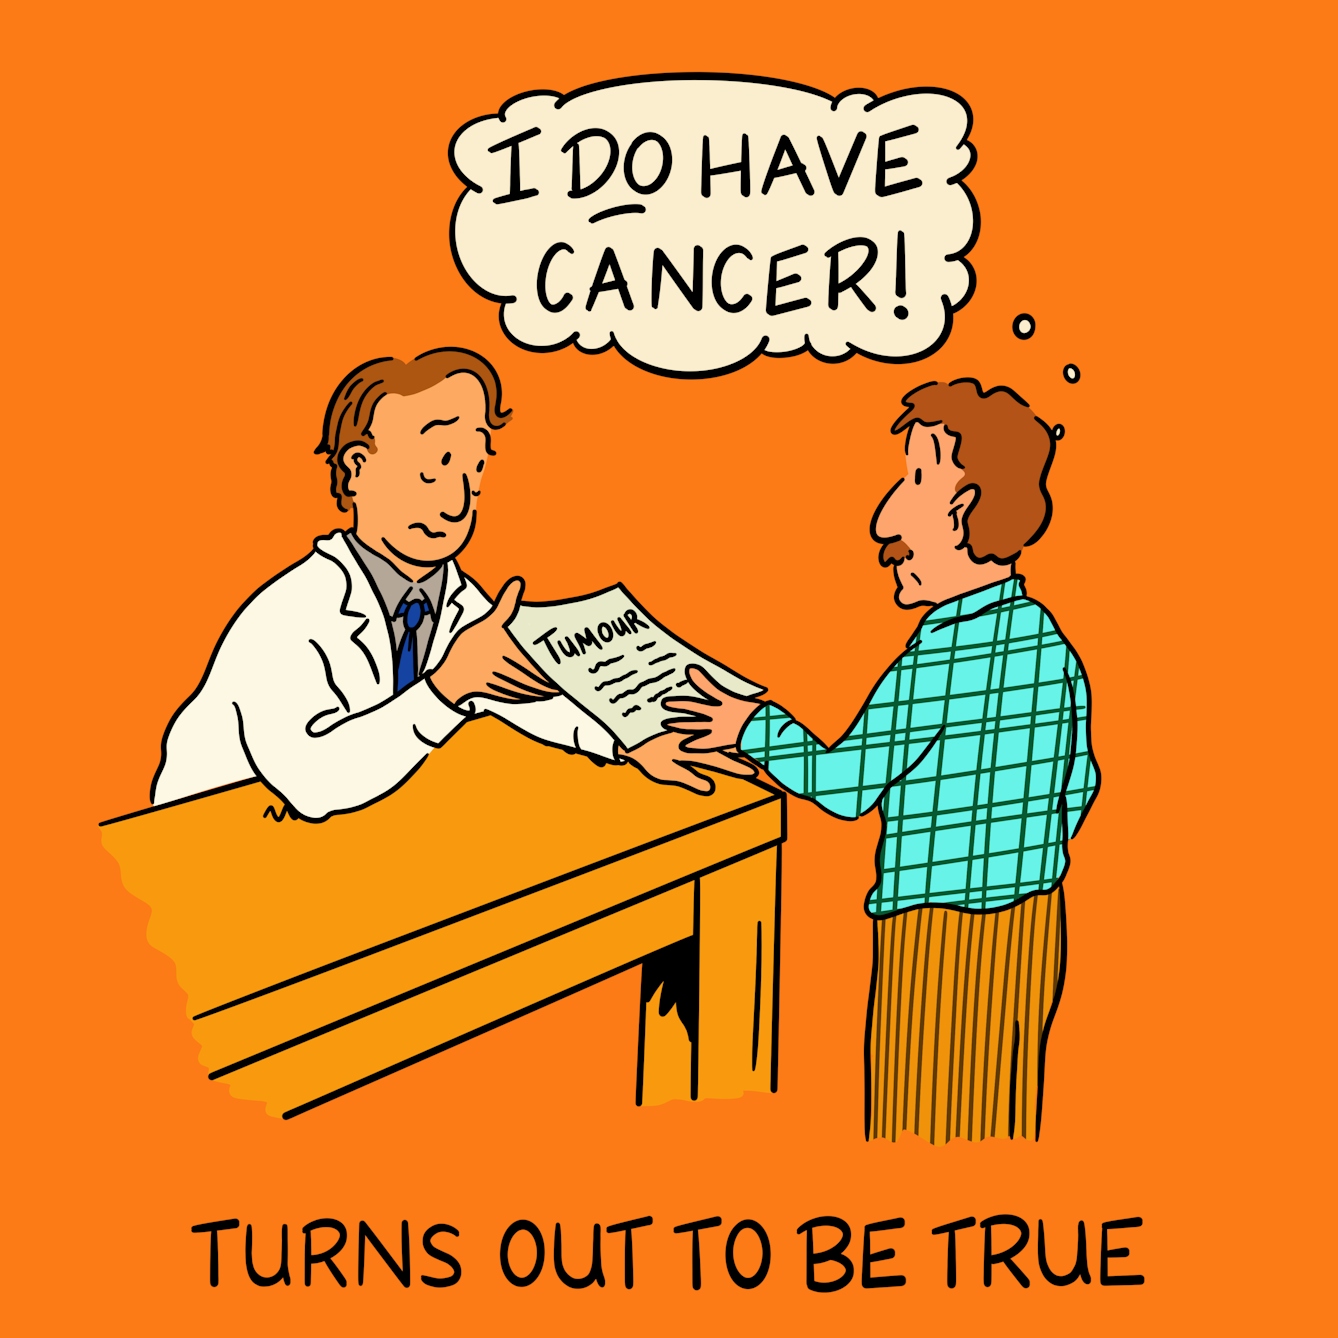 Panel 2 of a four-panel comic drawn digitally: a white man with a moustache, corduroy trousers and a plaid shirt is handed a piece of paper headed "Tumour" by a concerned-looking man in a white labcoat. The man receiving the paper thinks "I do have cancer!". The caption text reads "turns out to be true..."